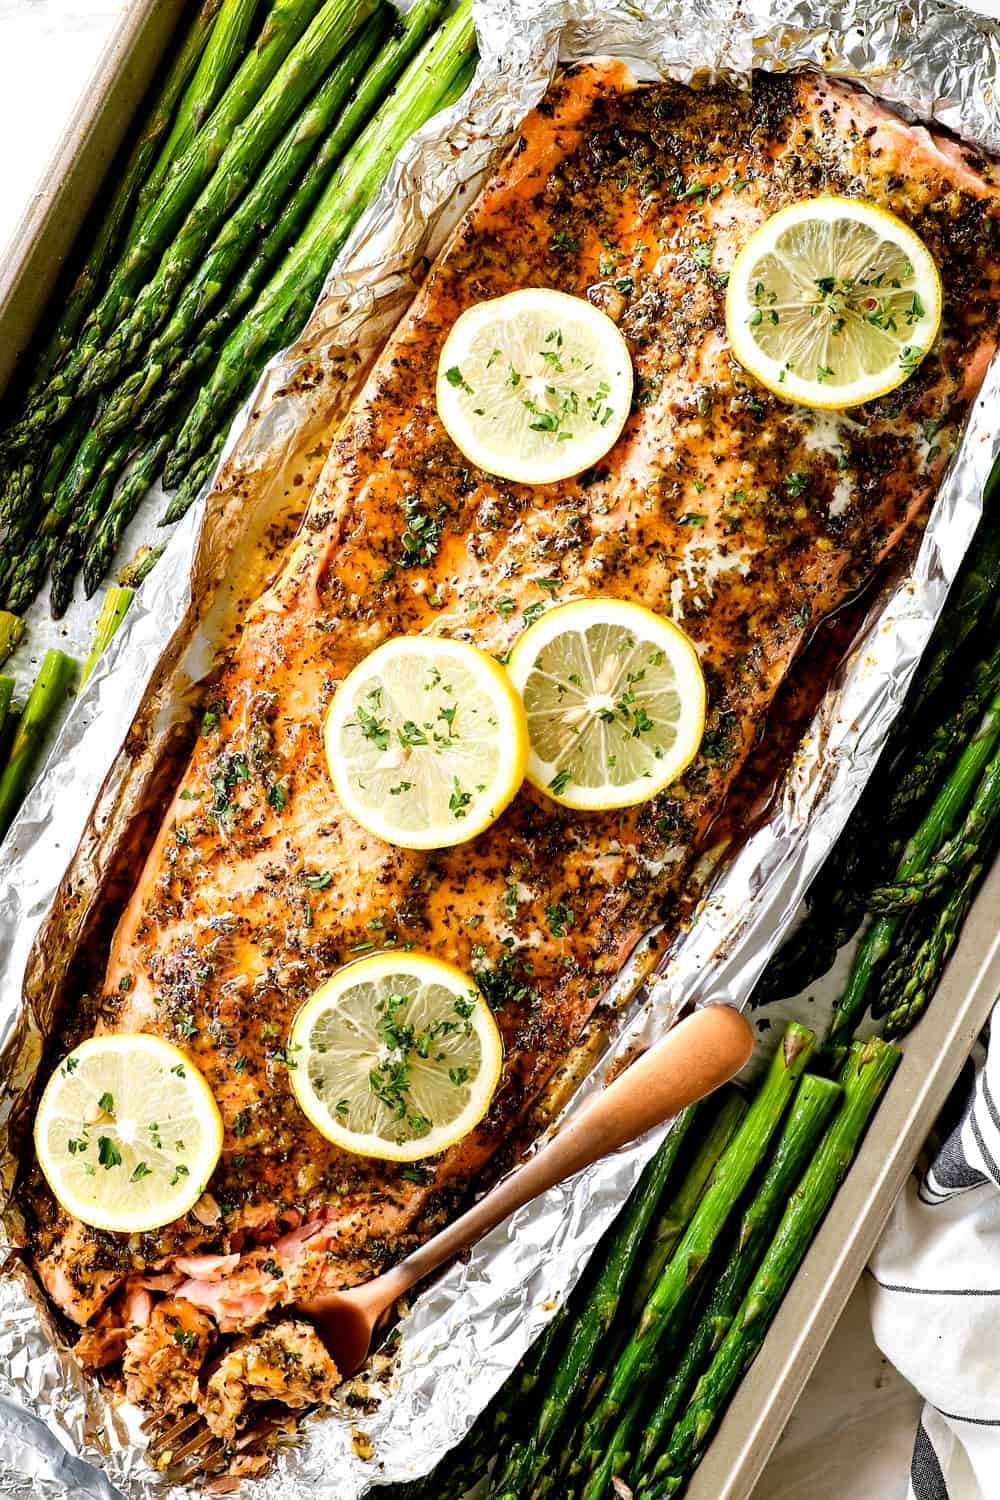 showing how tender bake lemon pepper salmon is by flaking with a fork